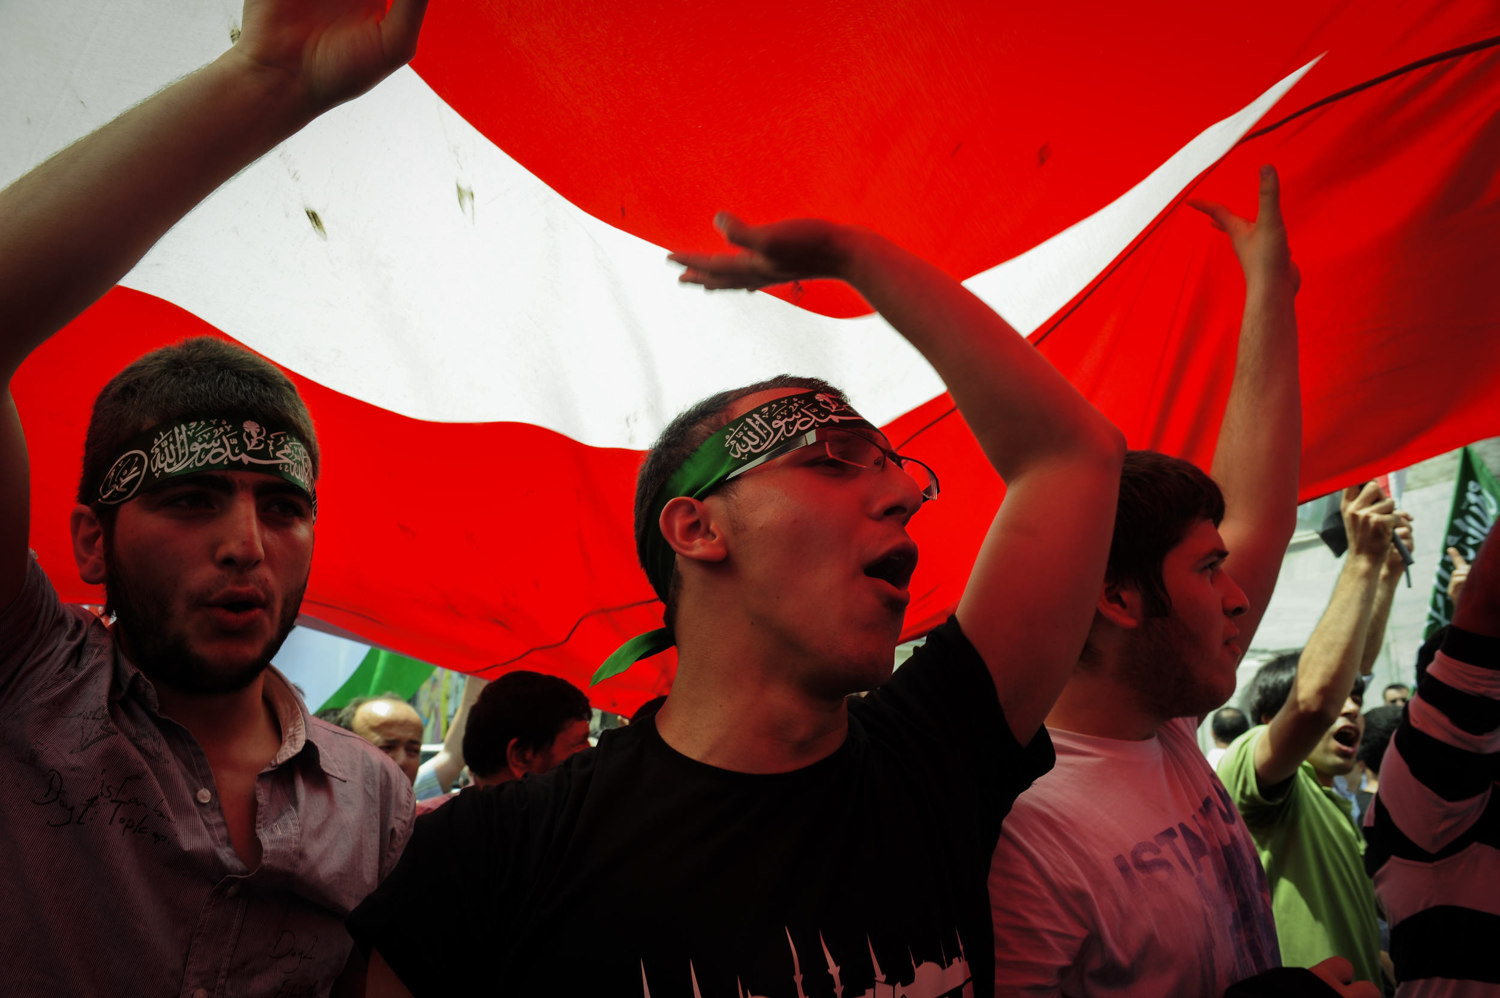  Turkish youth demonstrators shout slogans and burn Israeli flags during an anti-Israeli protest in Taksim Square in Istanbul on May 31, 2010. After the Israeli raid on the "Mavi Marmara" a Turkish ship carrying aid to Palestine nine activists were k